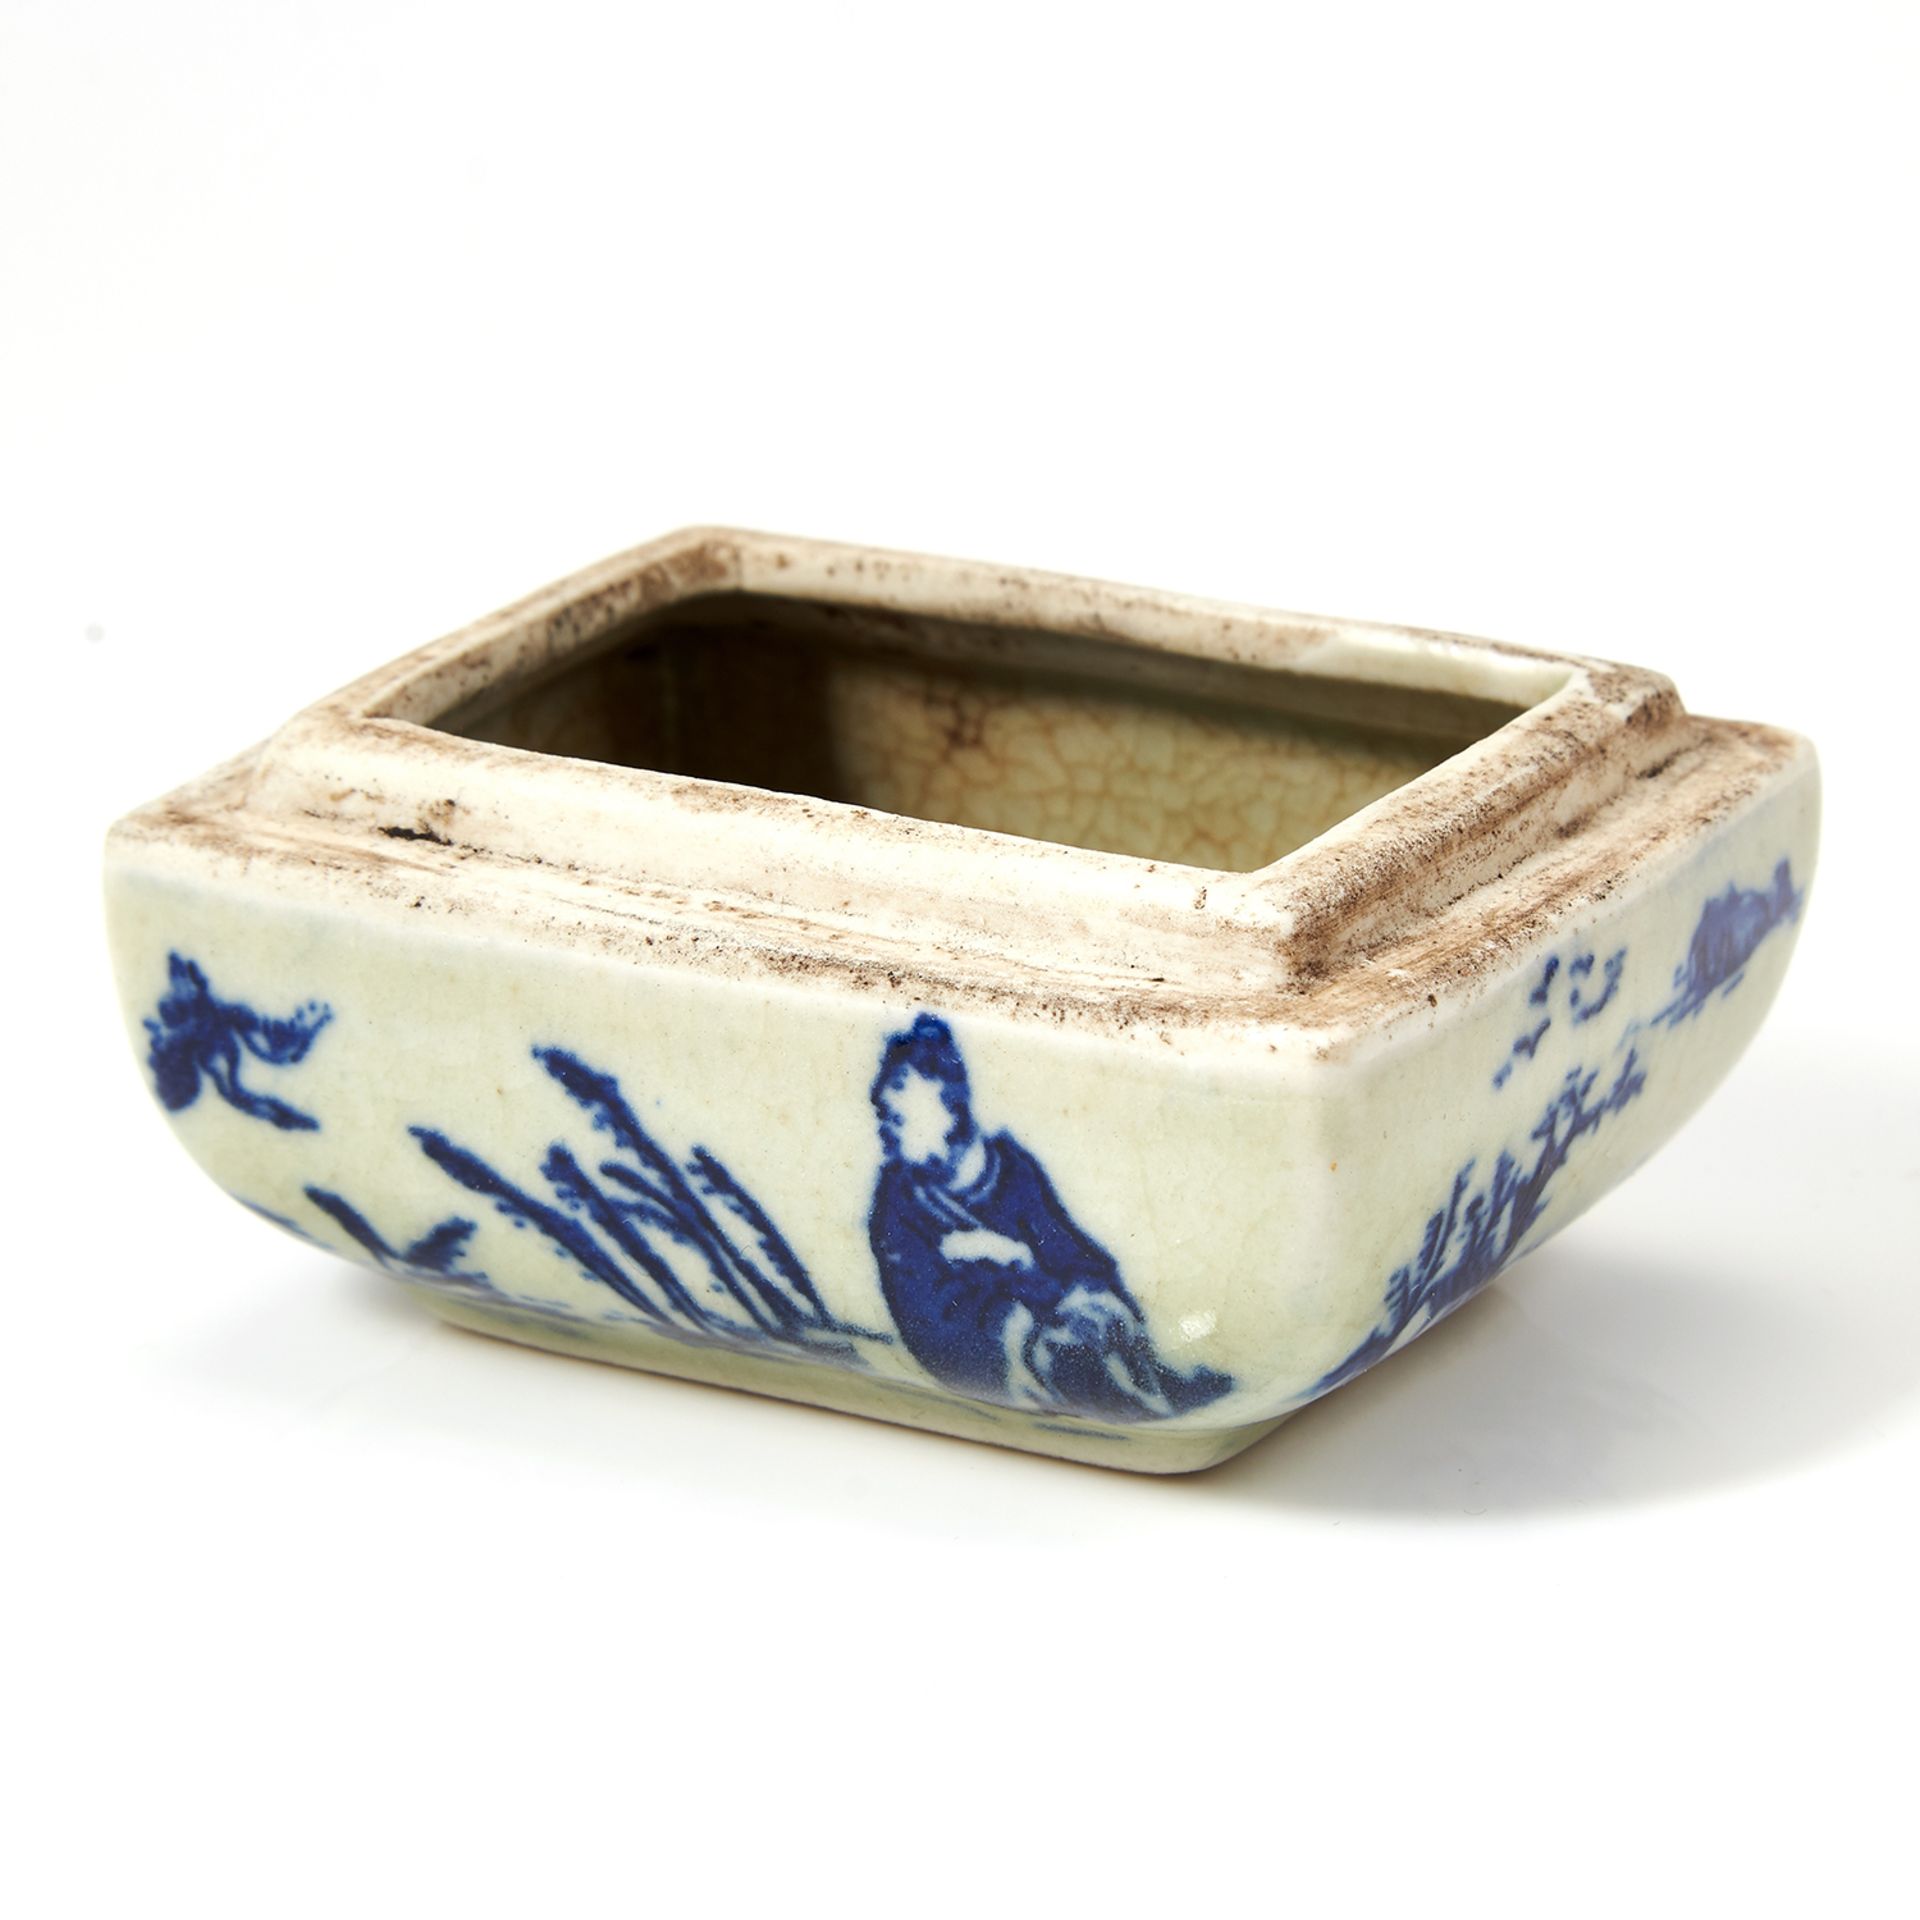 A CHINESE BLUE AND WHITE EROTIC BOX BASE rectangular form with blue and white decoration, the inside